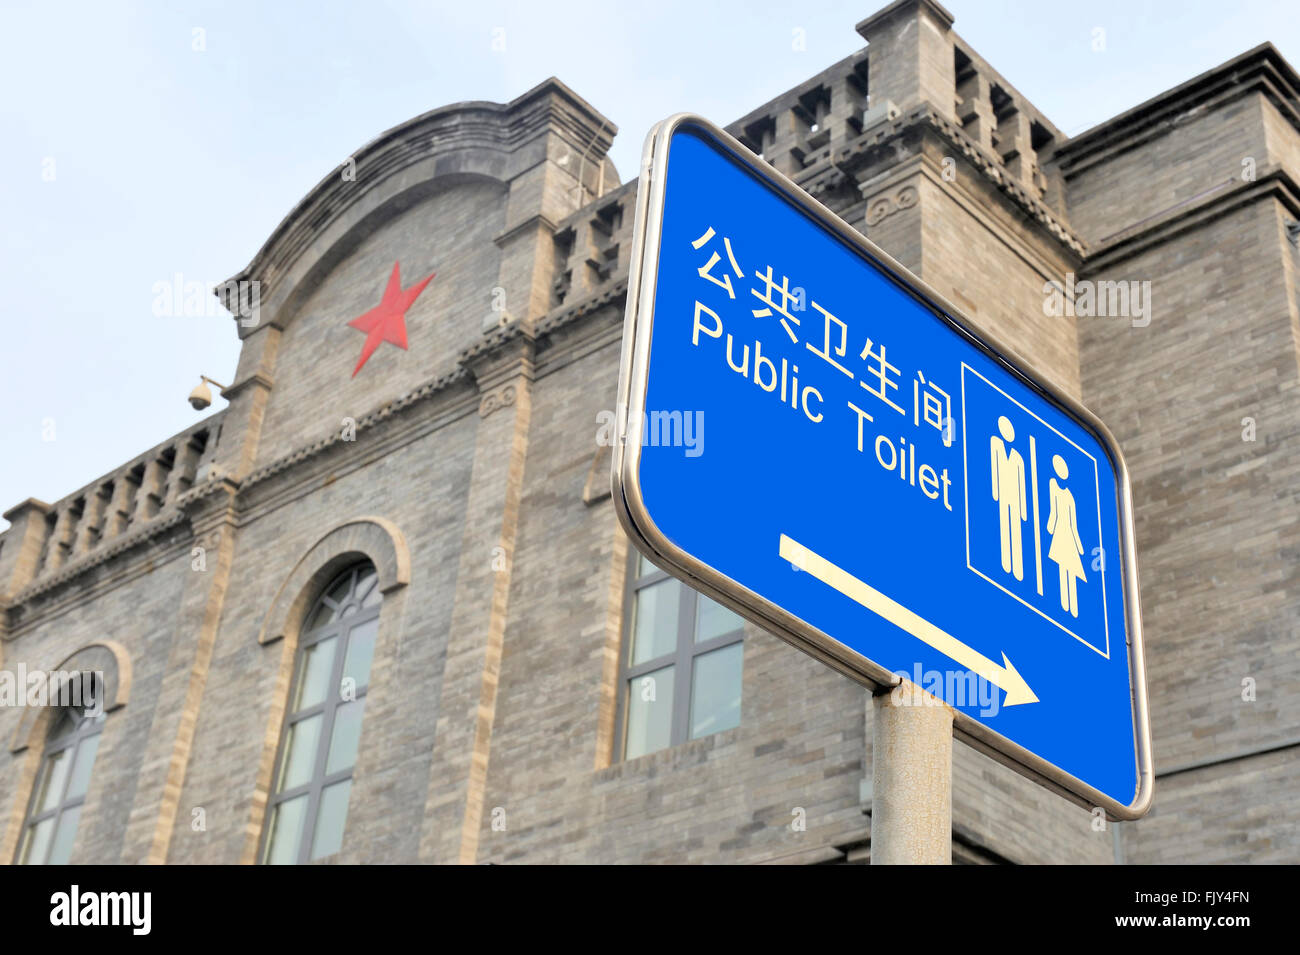 Sign in English and Chinese with text: Public Toilet.At background building with red cross Stock Photo